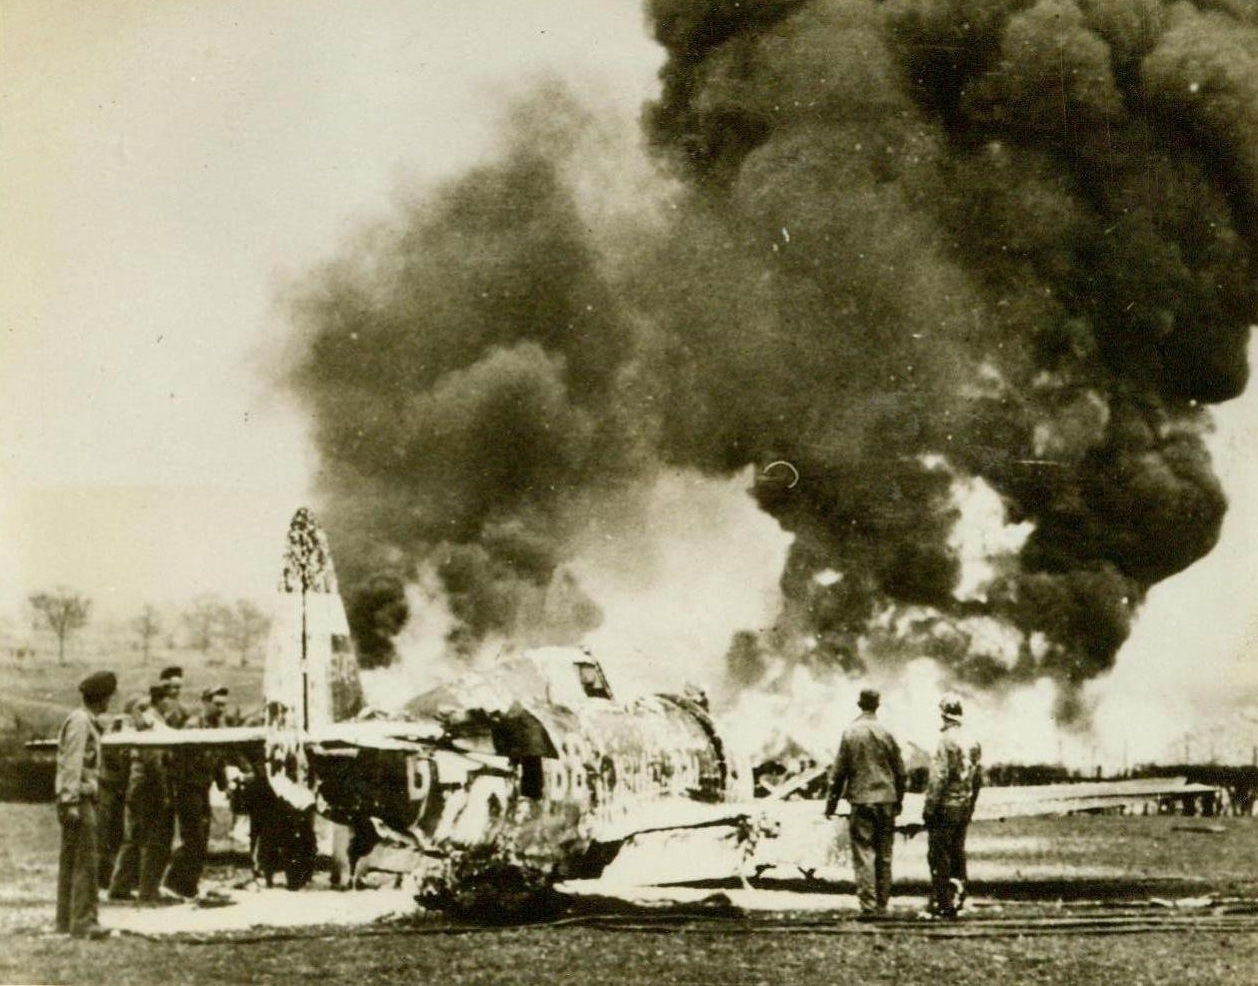 Grounded By An Oil Dump - 1, 5/19/1944. Britain - Smoke rises high in the sky from the sheets of flame enveloping this Thunderbolt Fighter Plane at a 9th Air Force Fighter Base. The plane, piloted by Capt. Thurman F. Morrison, of Memphis, Tenn., was taking off when it smashed into a 40,000-gallon oil dump and immediately burst into flames. Two alert members of an Ack-Ack Unit, Pvt. Harold Smith, Framingham, Mass., and Dominick J. Camonarano, Bronx, N.Y., perceived the plight of the trapped pilot, hacked the canopy from the cockpit, and rescued Capt. Morrison. Credit: USAAF photo from ACME;